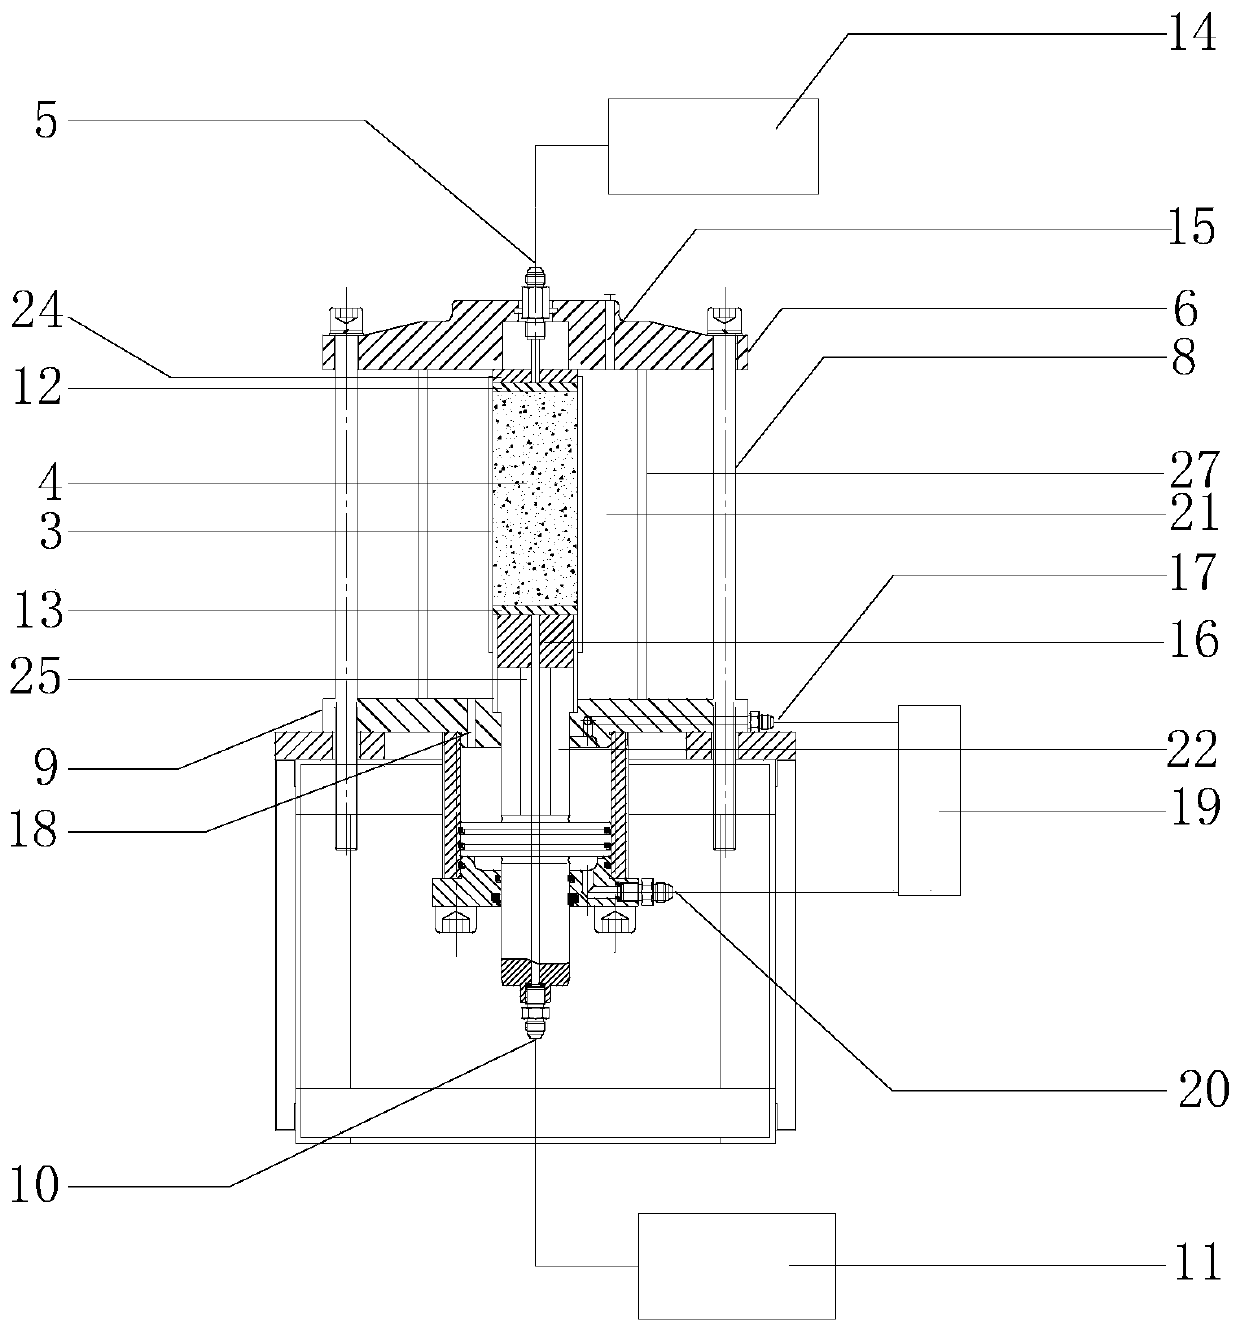 Test device and test method for critical seepage air pressure of soil in saturated strata under three-dimensional stress